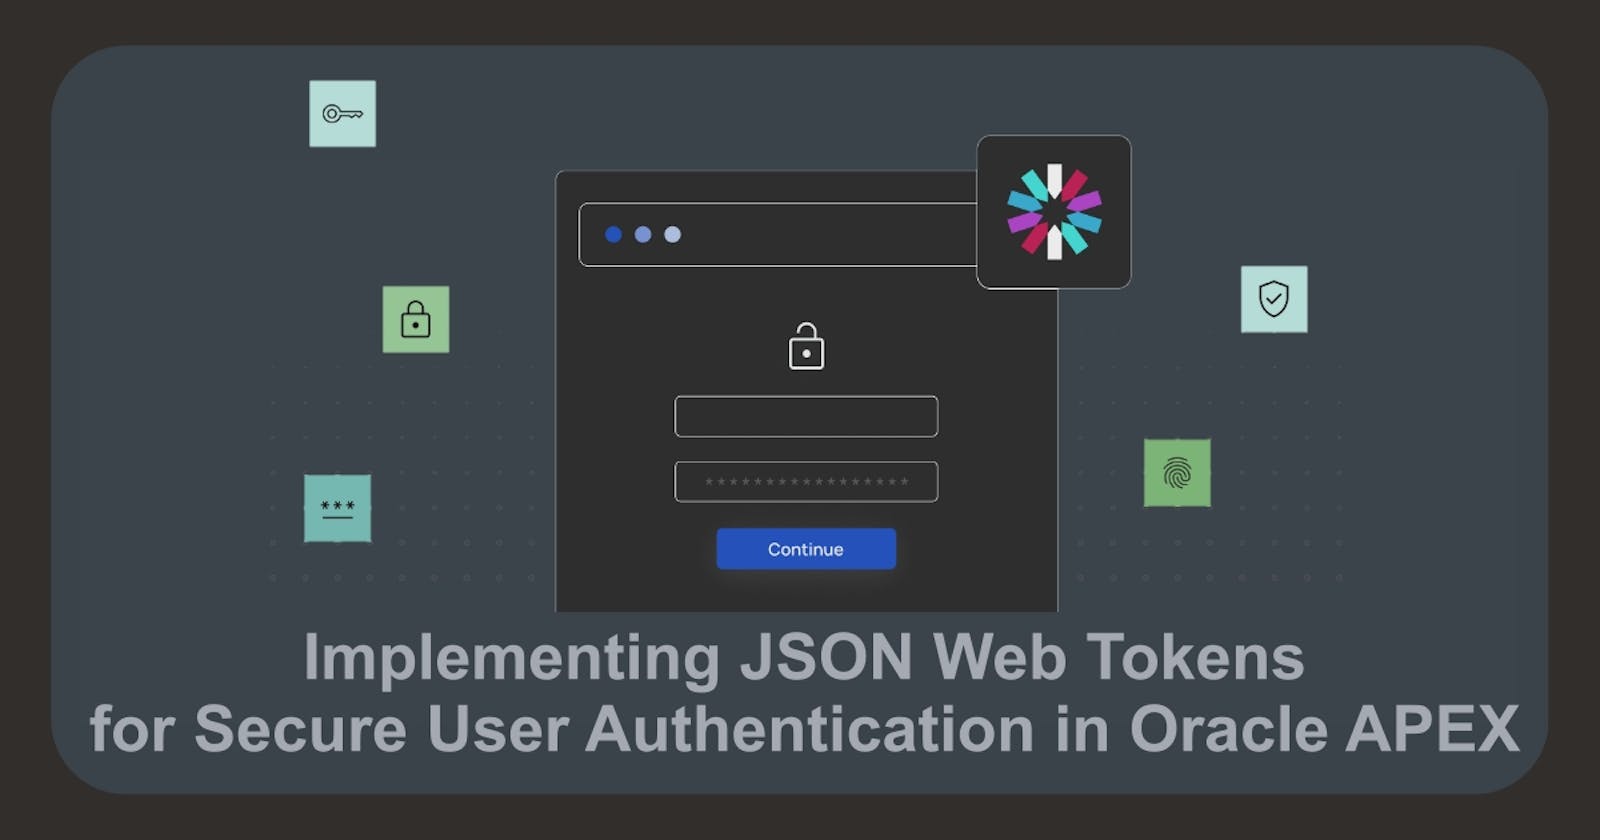 Implementing JWT for Secure User Authentication in Oracle APEX